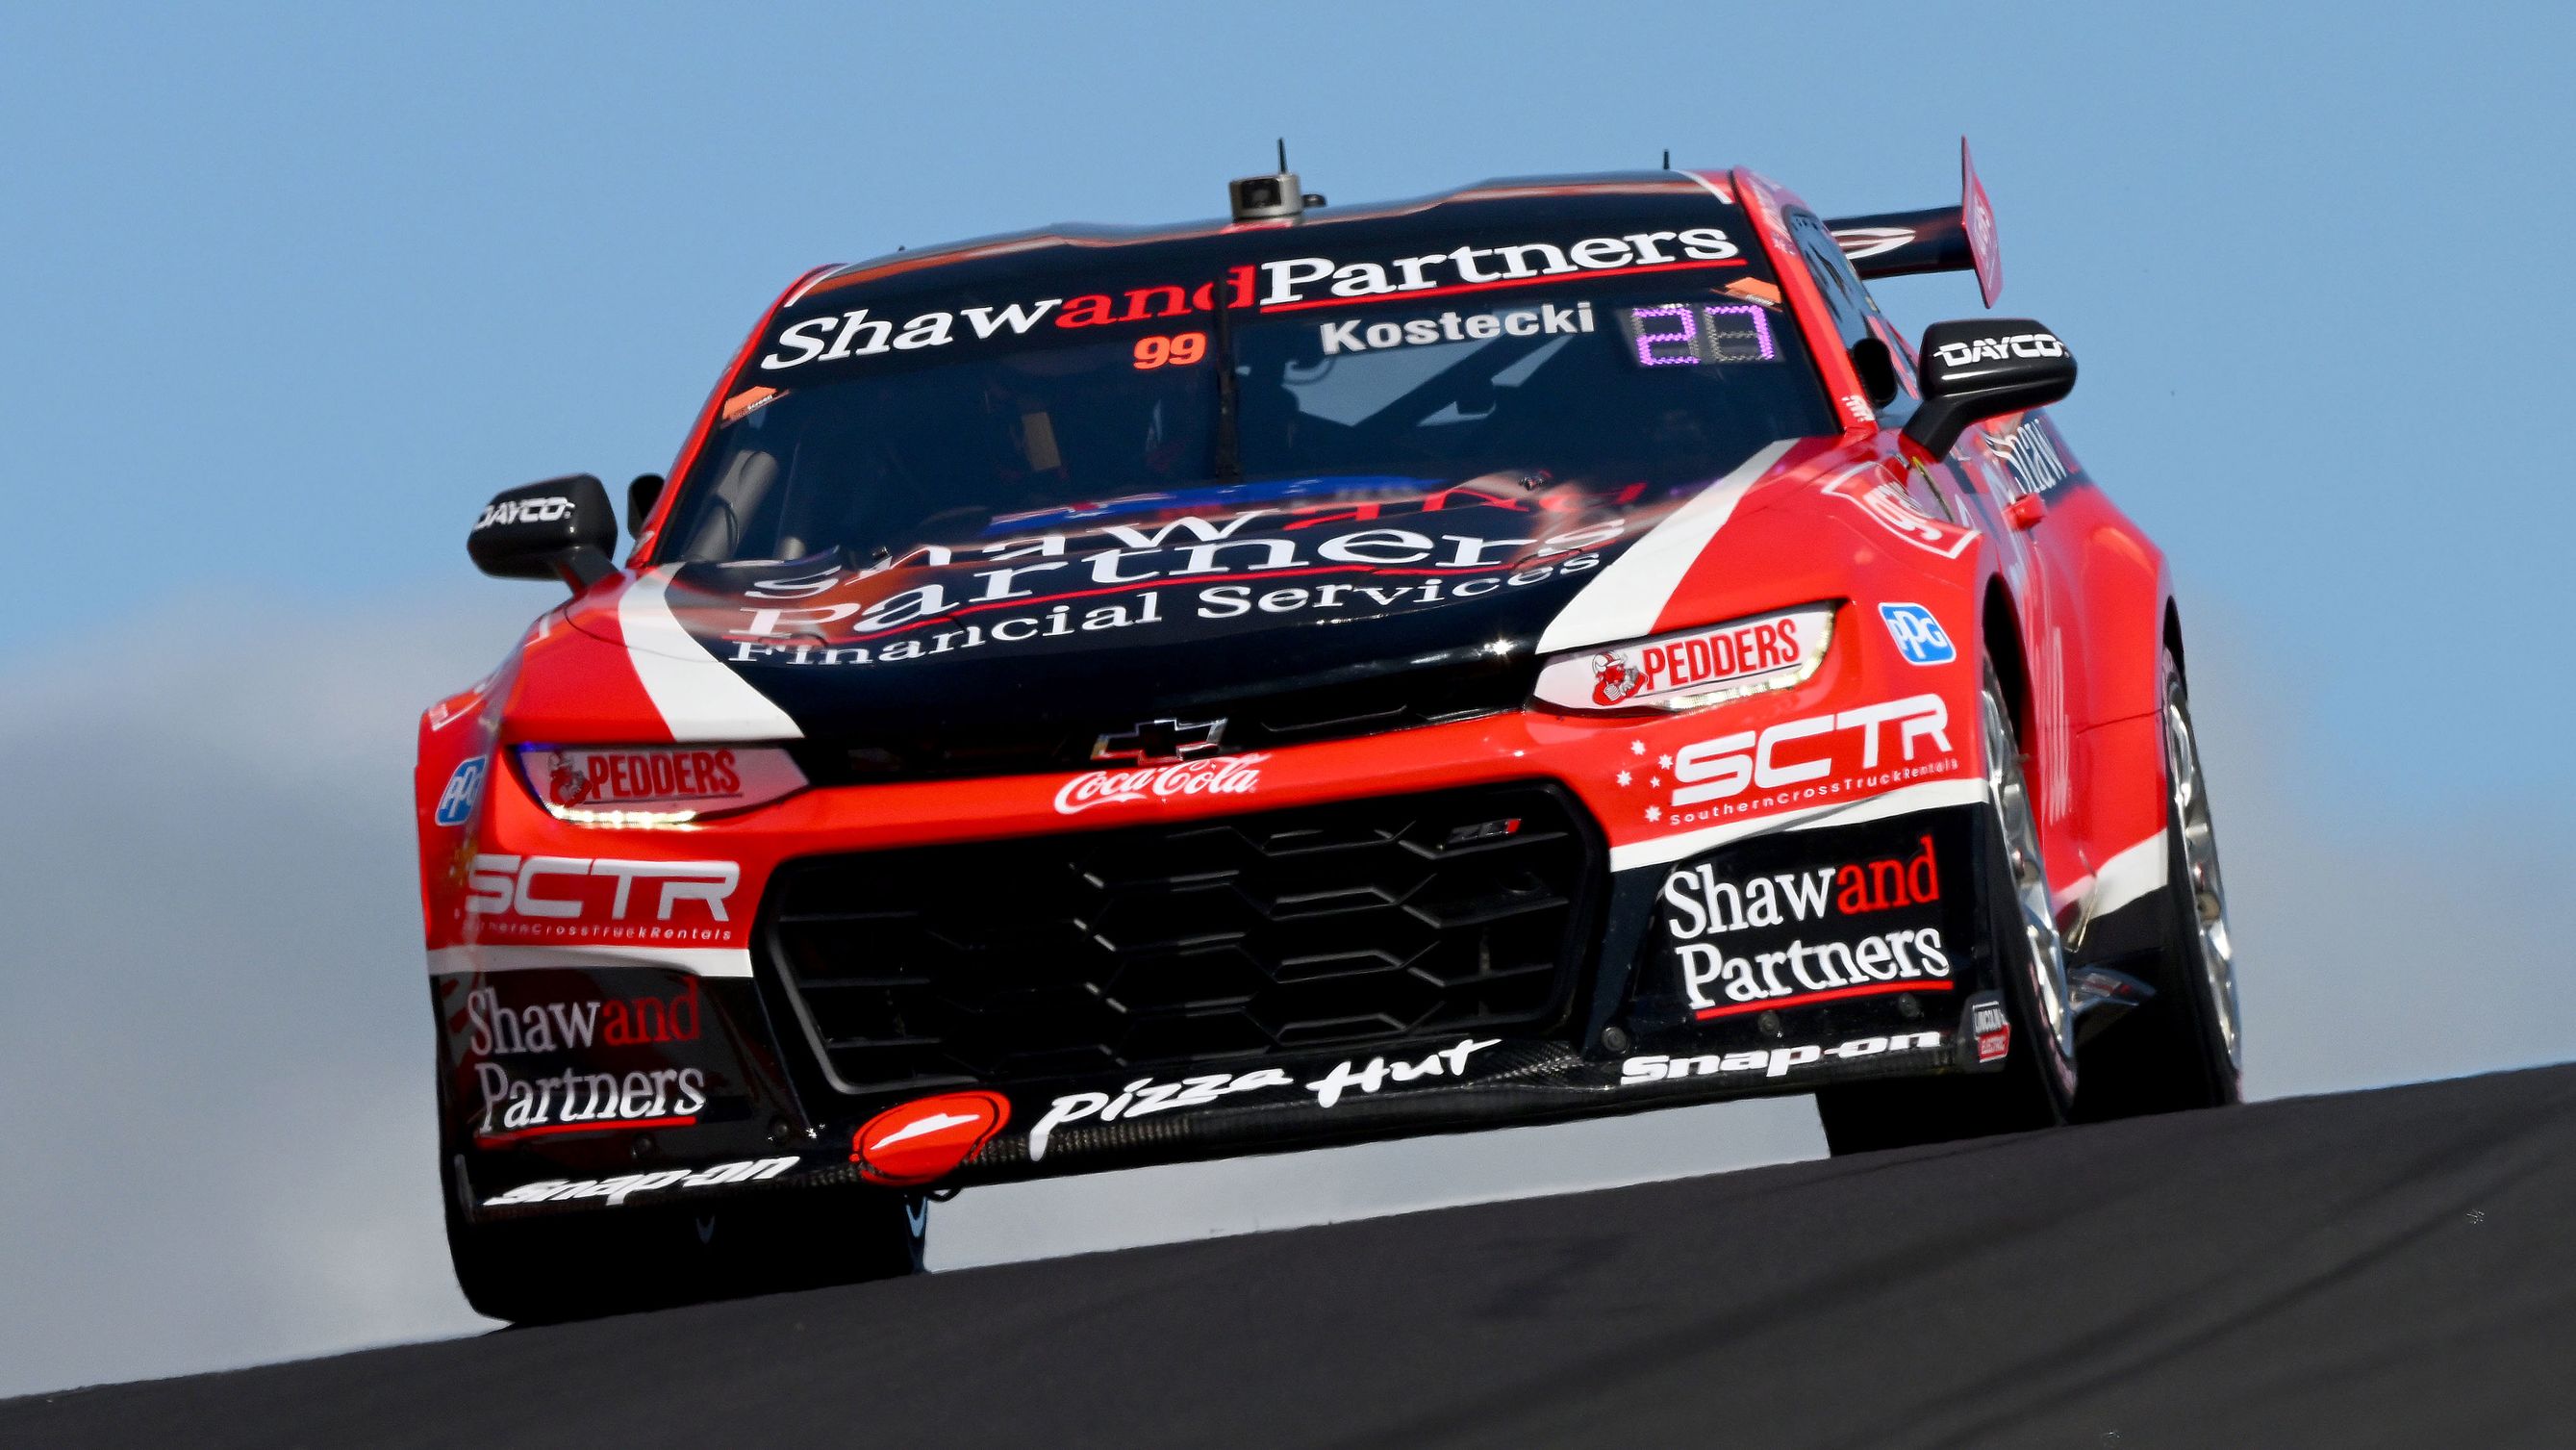 Brodie Kostecki drives the Erebus Motorsport Chevrolet Camaro in practice during the Bathurst 1000, part of the 2023 Supercars Championship Series at Mount Panorama on October 06, 2023 in Bathurst, Australia. (Photo by Morgan Hancock/Getty Images)